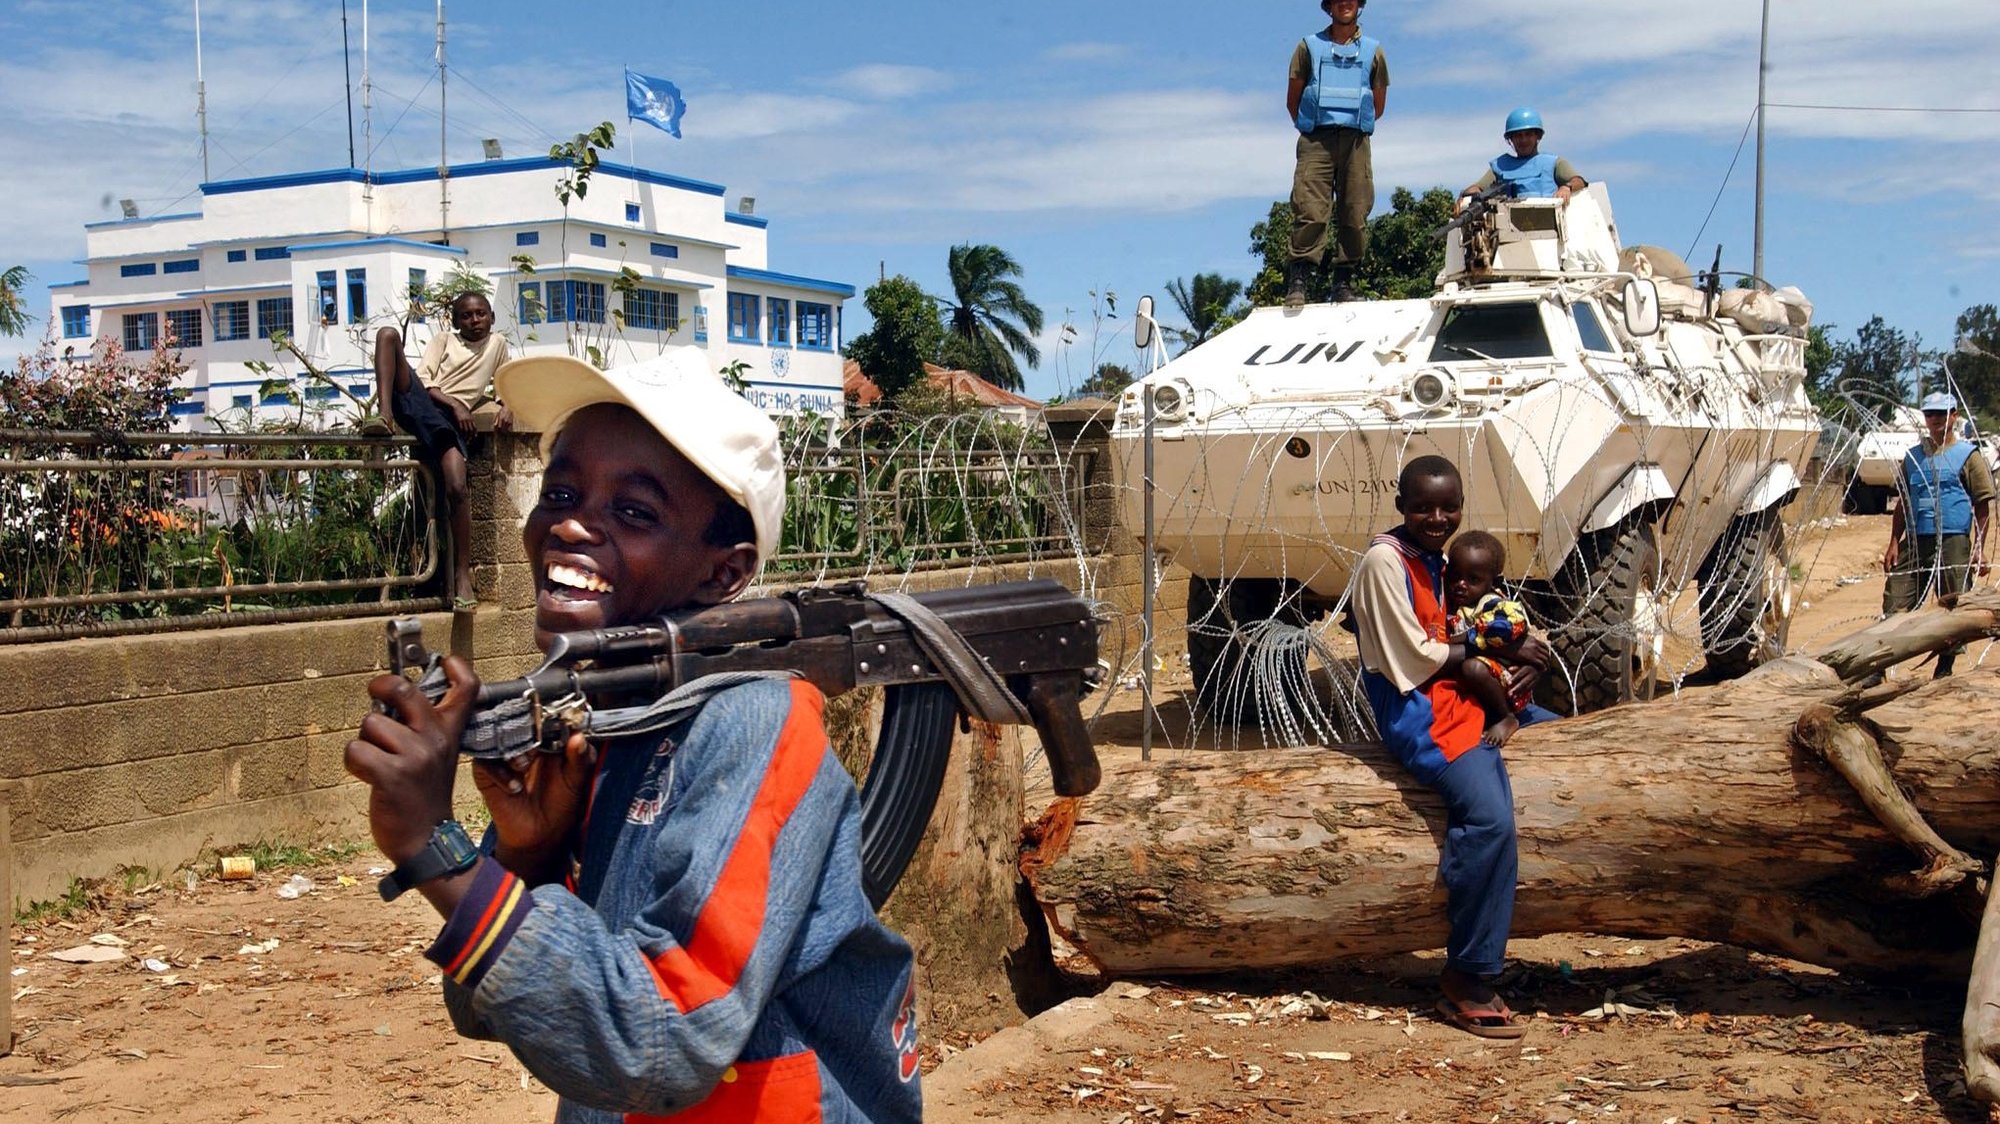 Child soldiers laugh outside the UN compound, 15 May 2003 in Bunia, Democratic Republic of Congo (DRC) as Un soldiers stand guard. The northeastern town of Bunia has been a theater of violent clashes between the Hema and the Lendu militias. MONUC (UN Mission to Congo) compound has been the main assembling point for the displaced from the region.  AFP PHOTO/MARCO L ONGARI             AFP PHOTO/MARCO L ONGARI